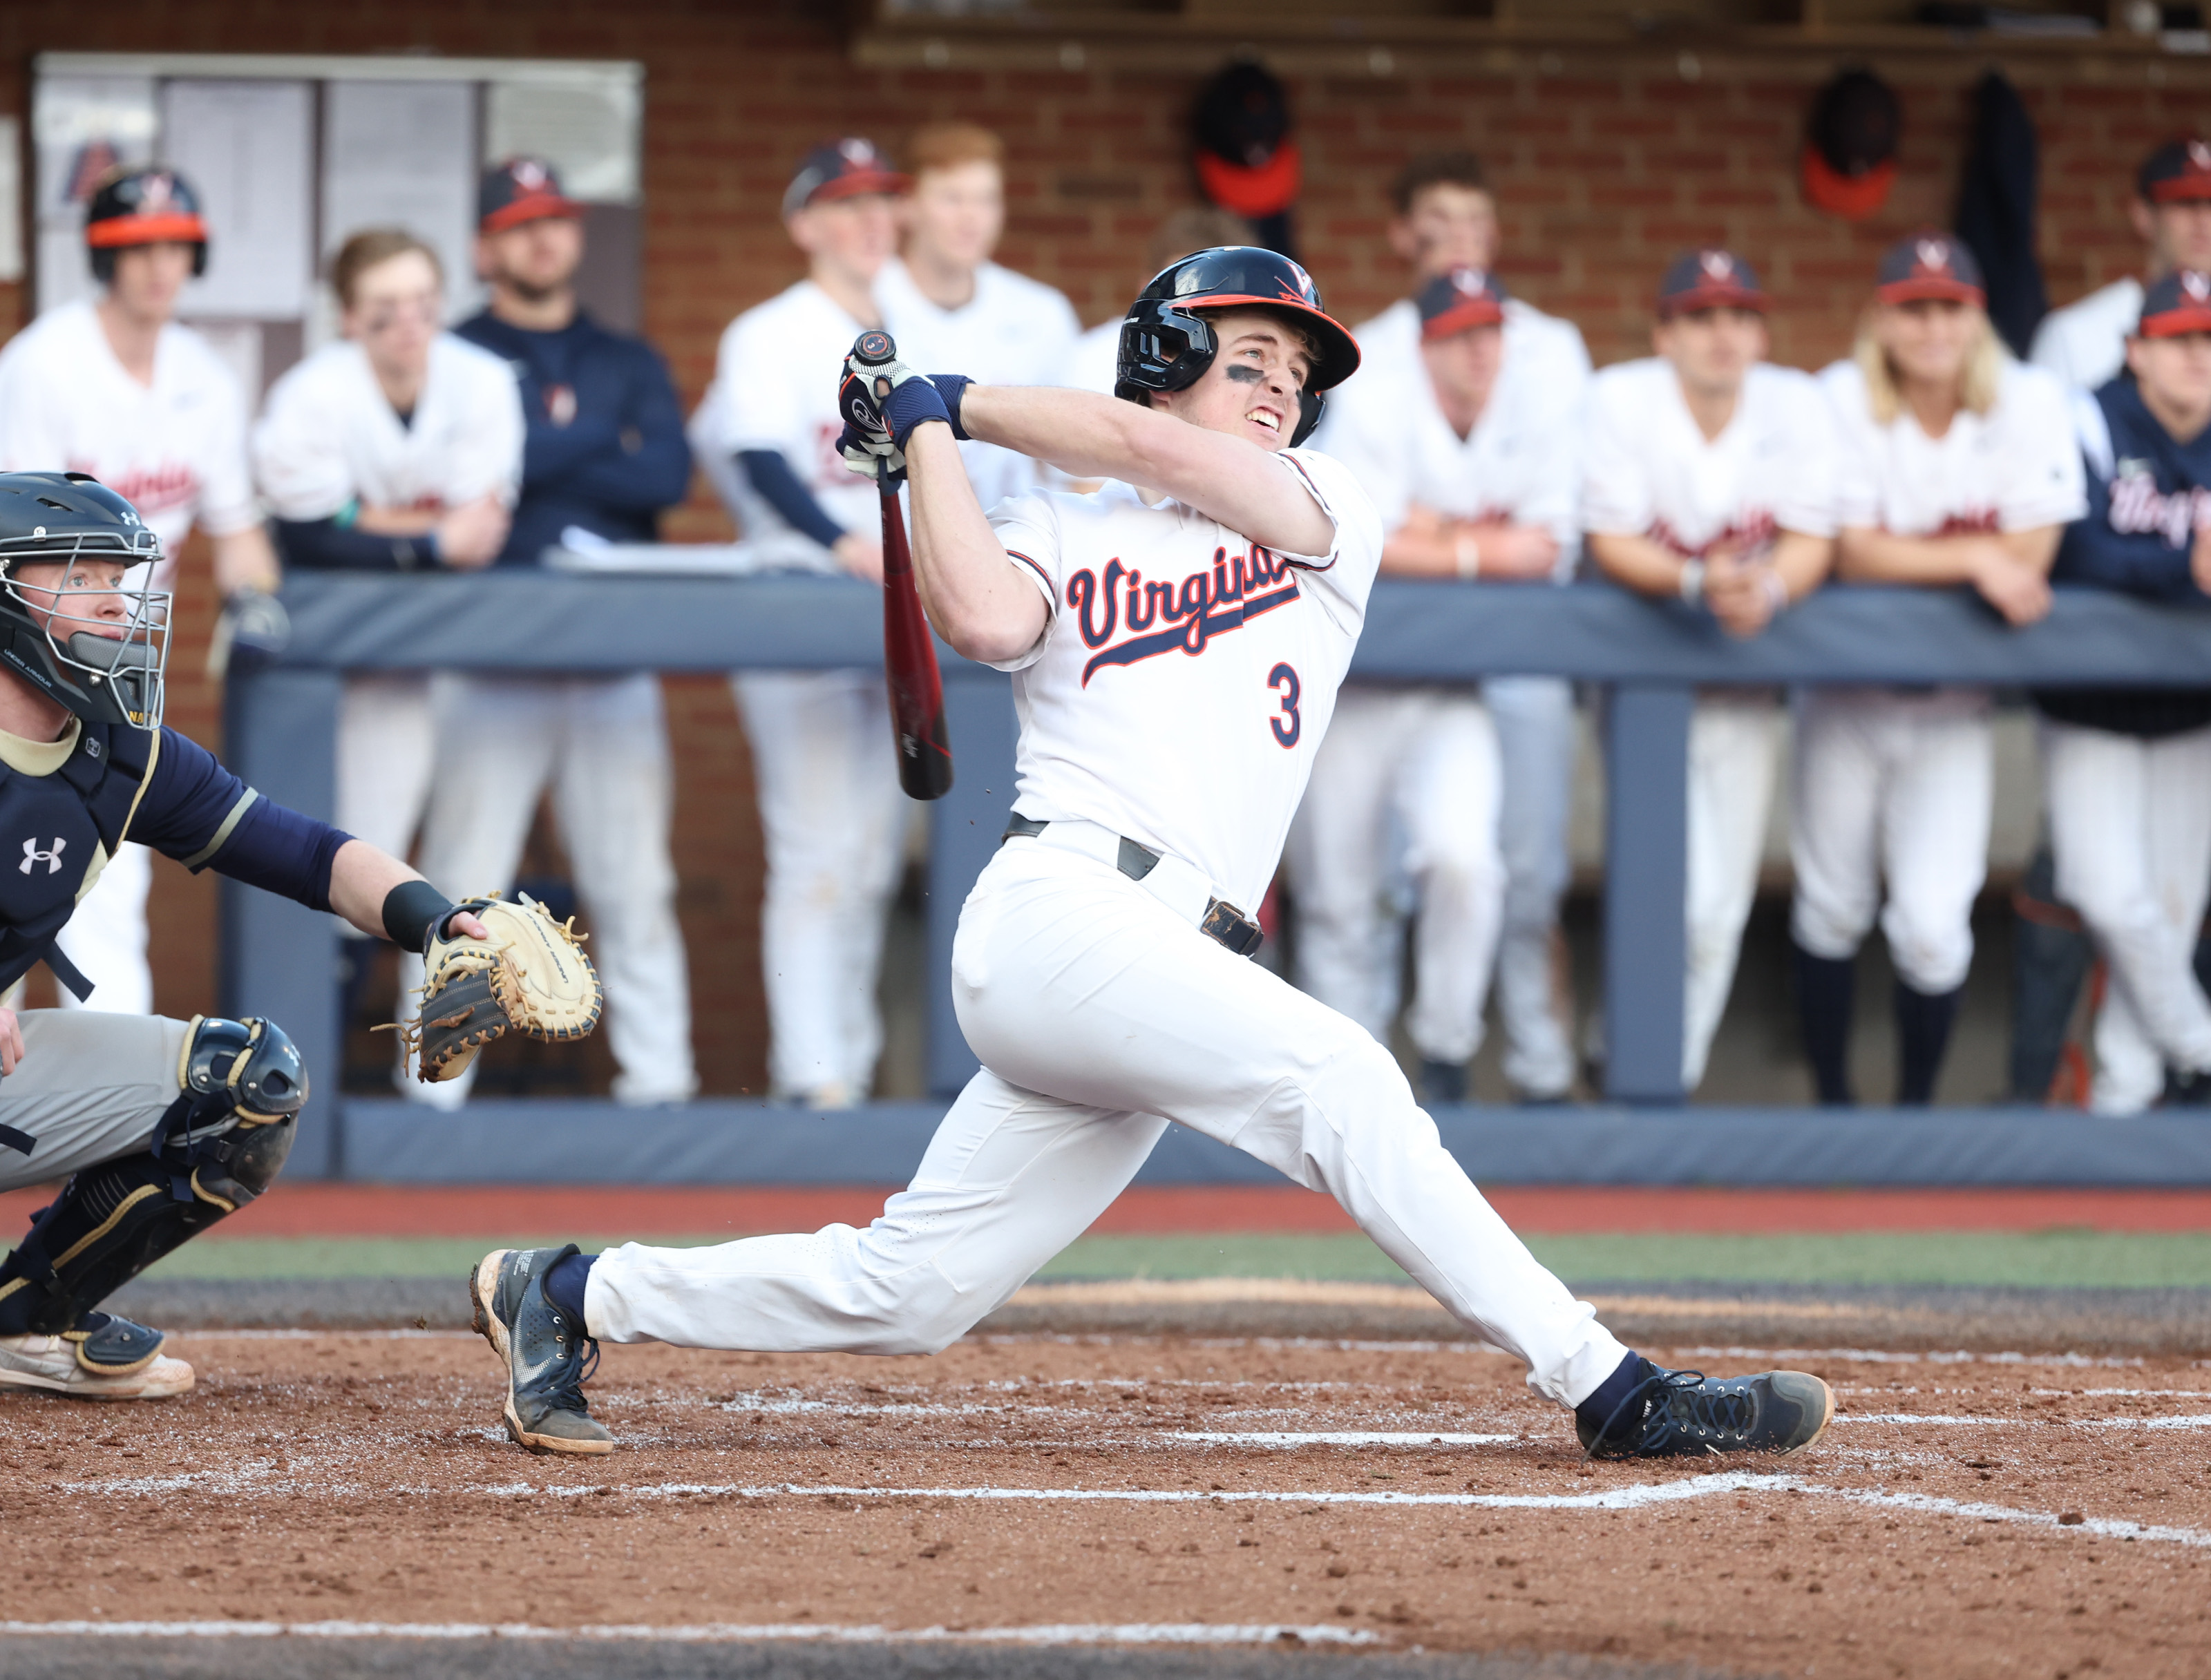 Red Sox draft Kyle Teel, Virginia catcher, with No. 14 overall